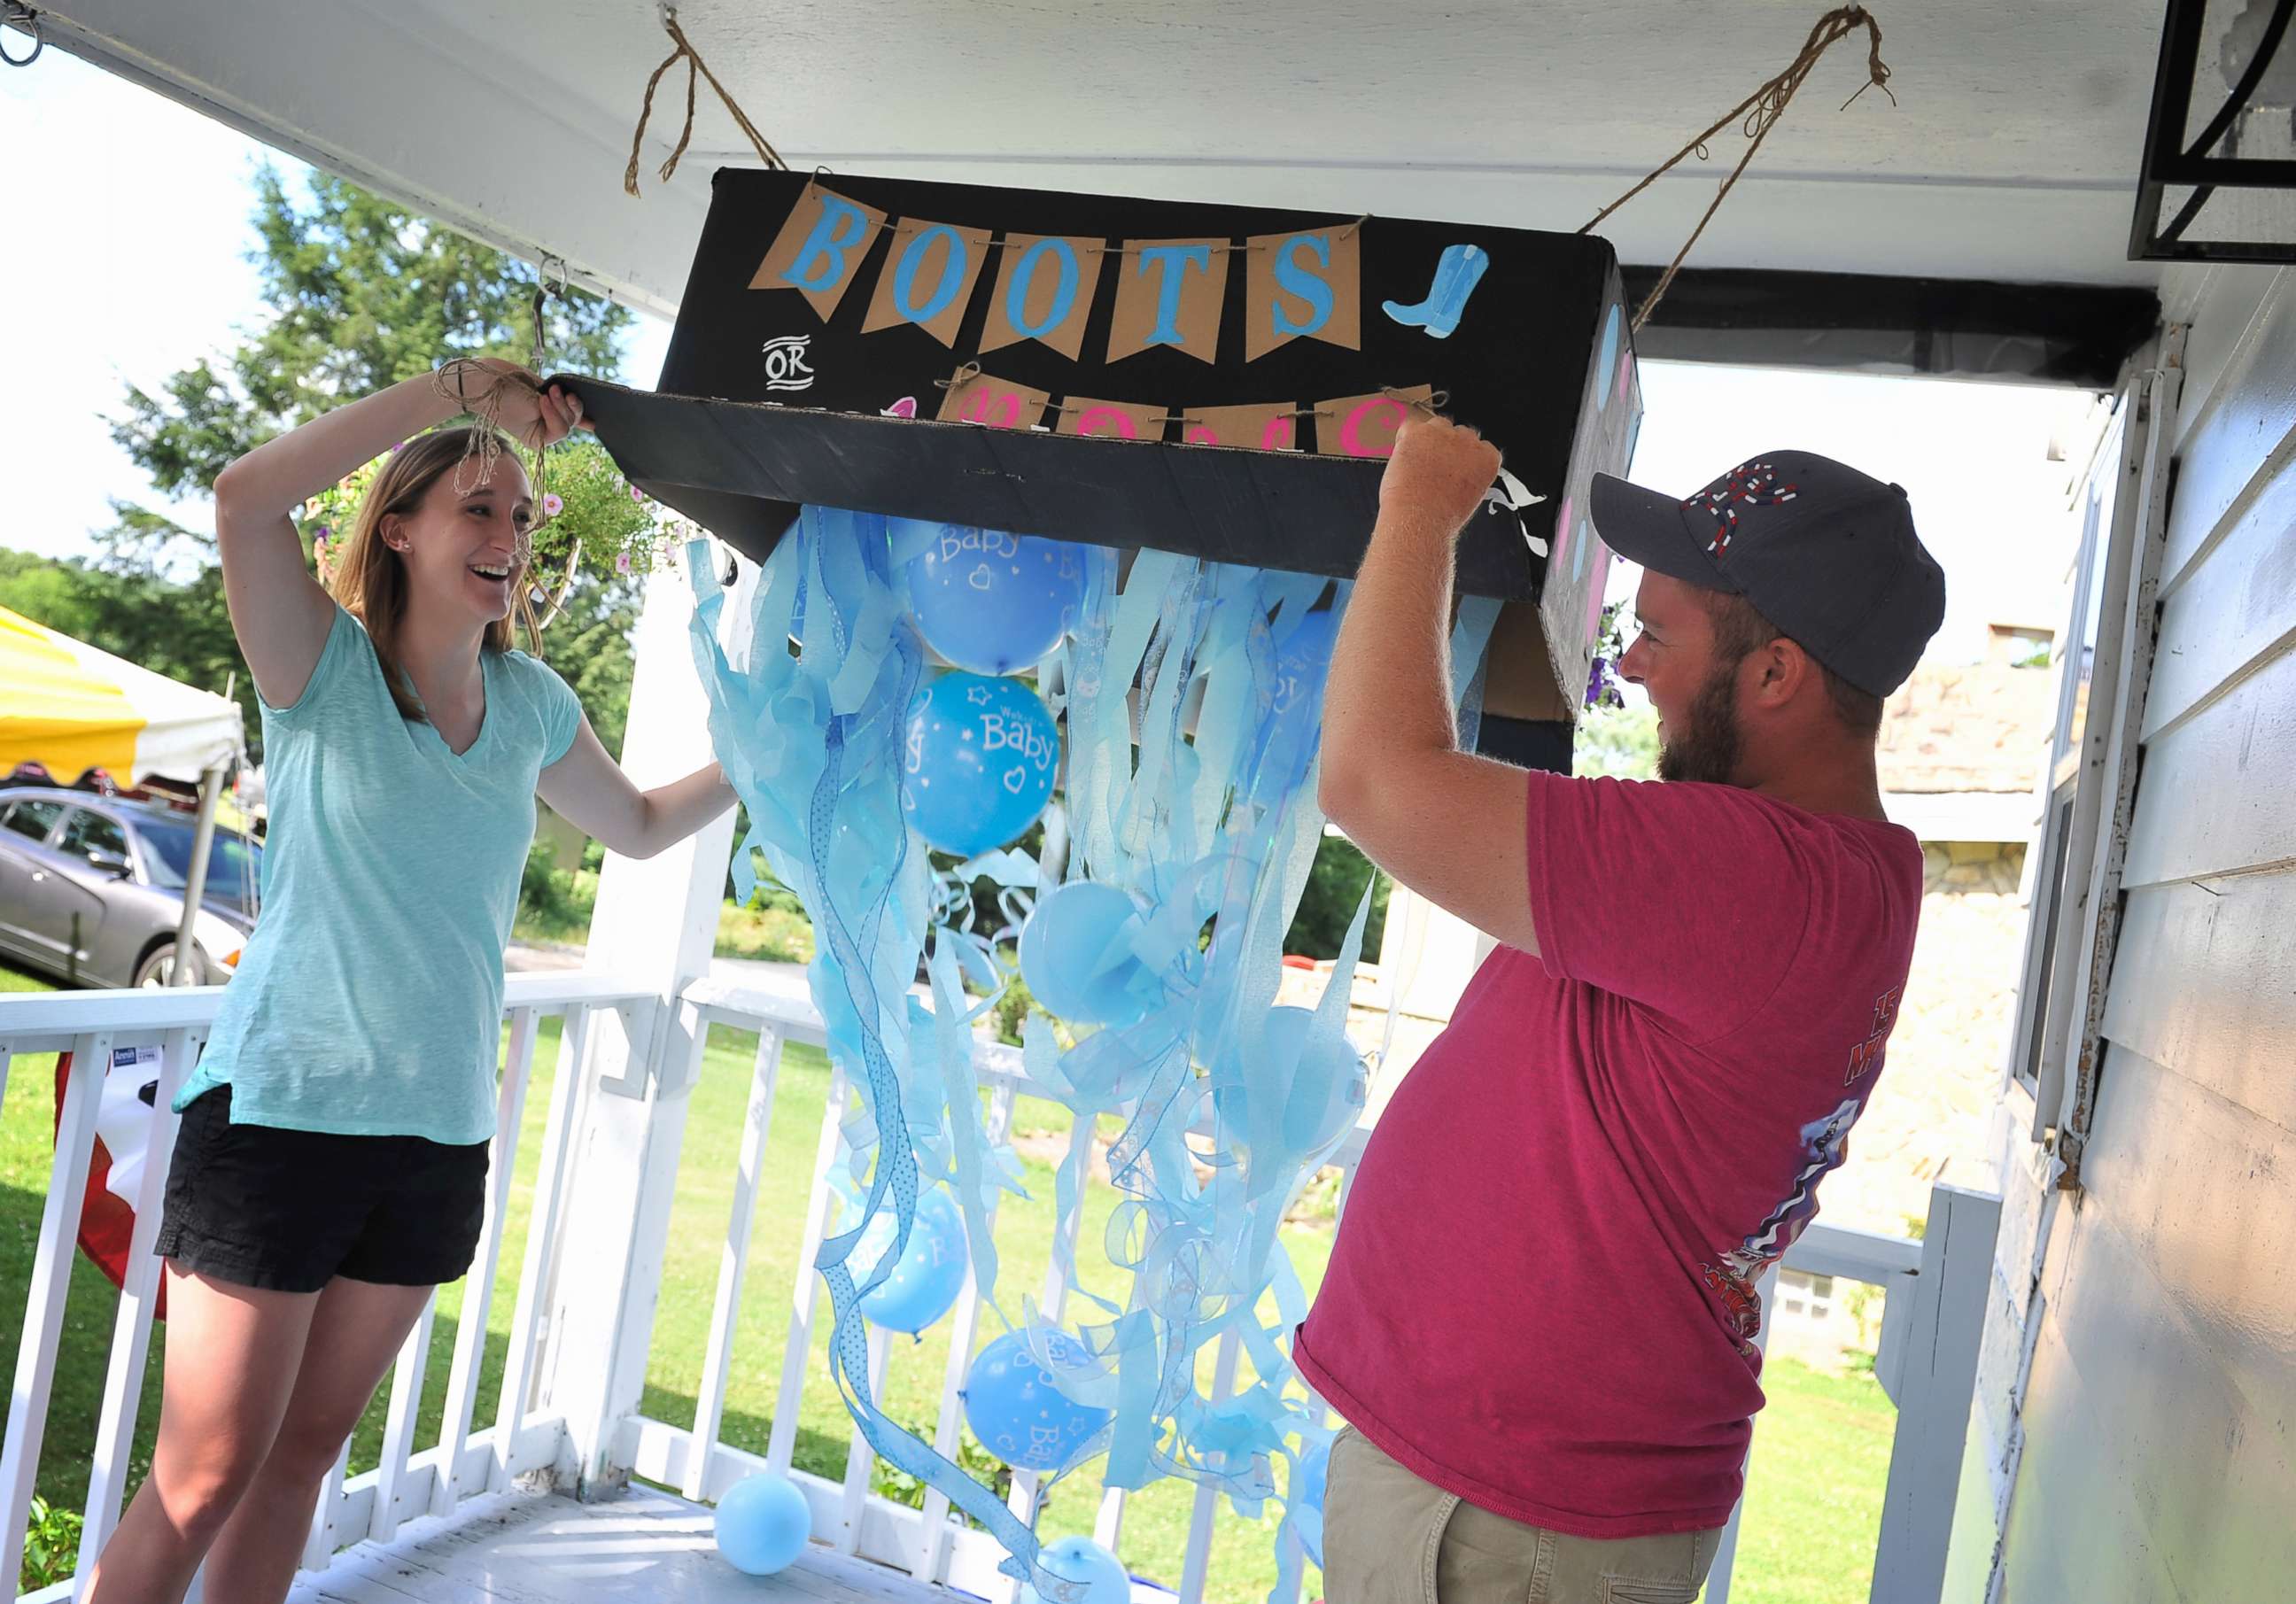 PHOTO: Zack Muellerleile and his pregnant wife, Joscelyn Muellerleile, both 23-year-old residents of Norvelt, Penn., hosted a party on July 1 to announce whether they were expecting a boy or girl.